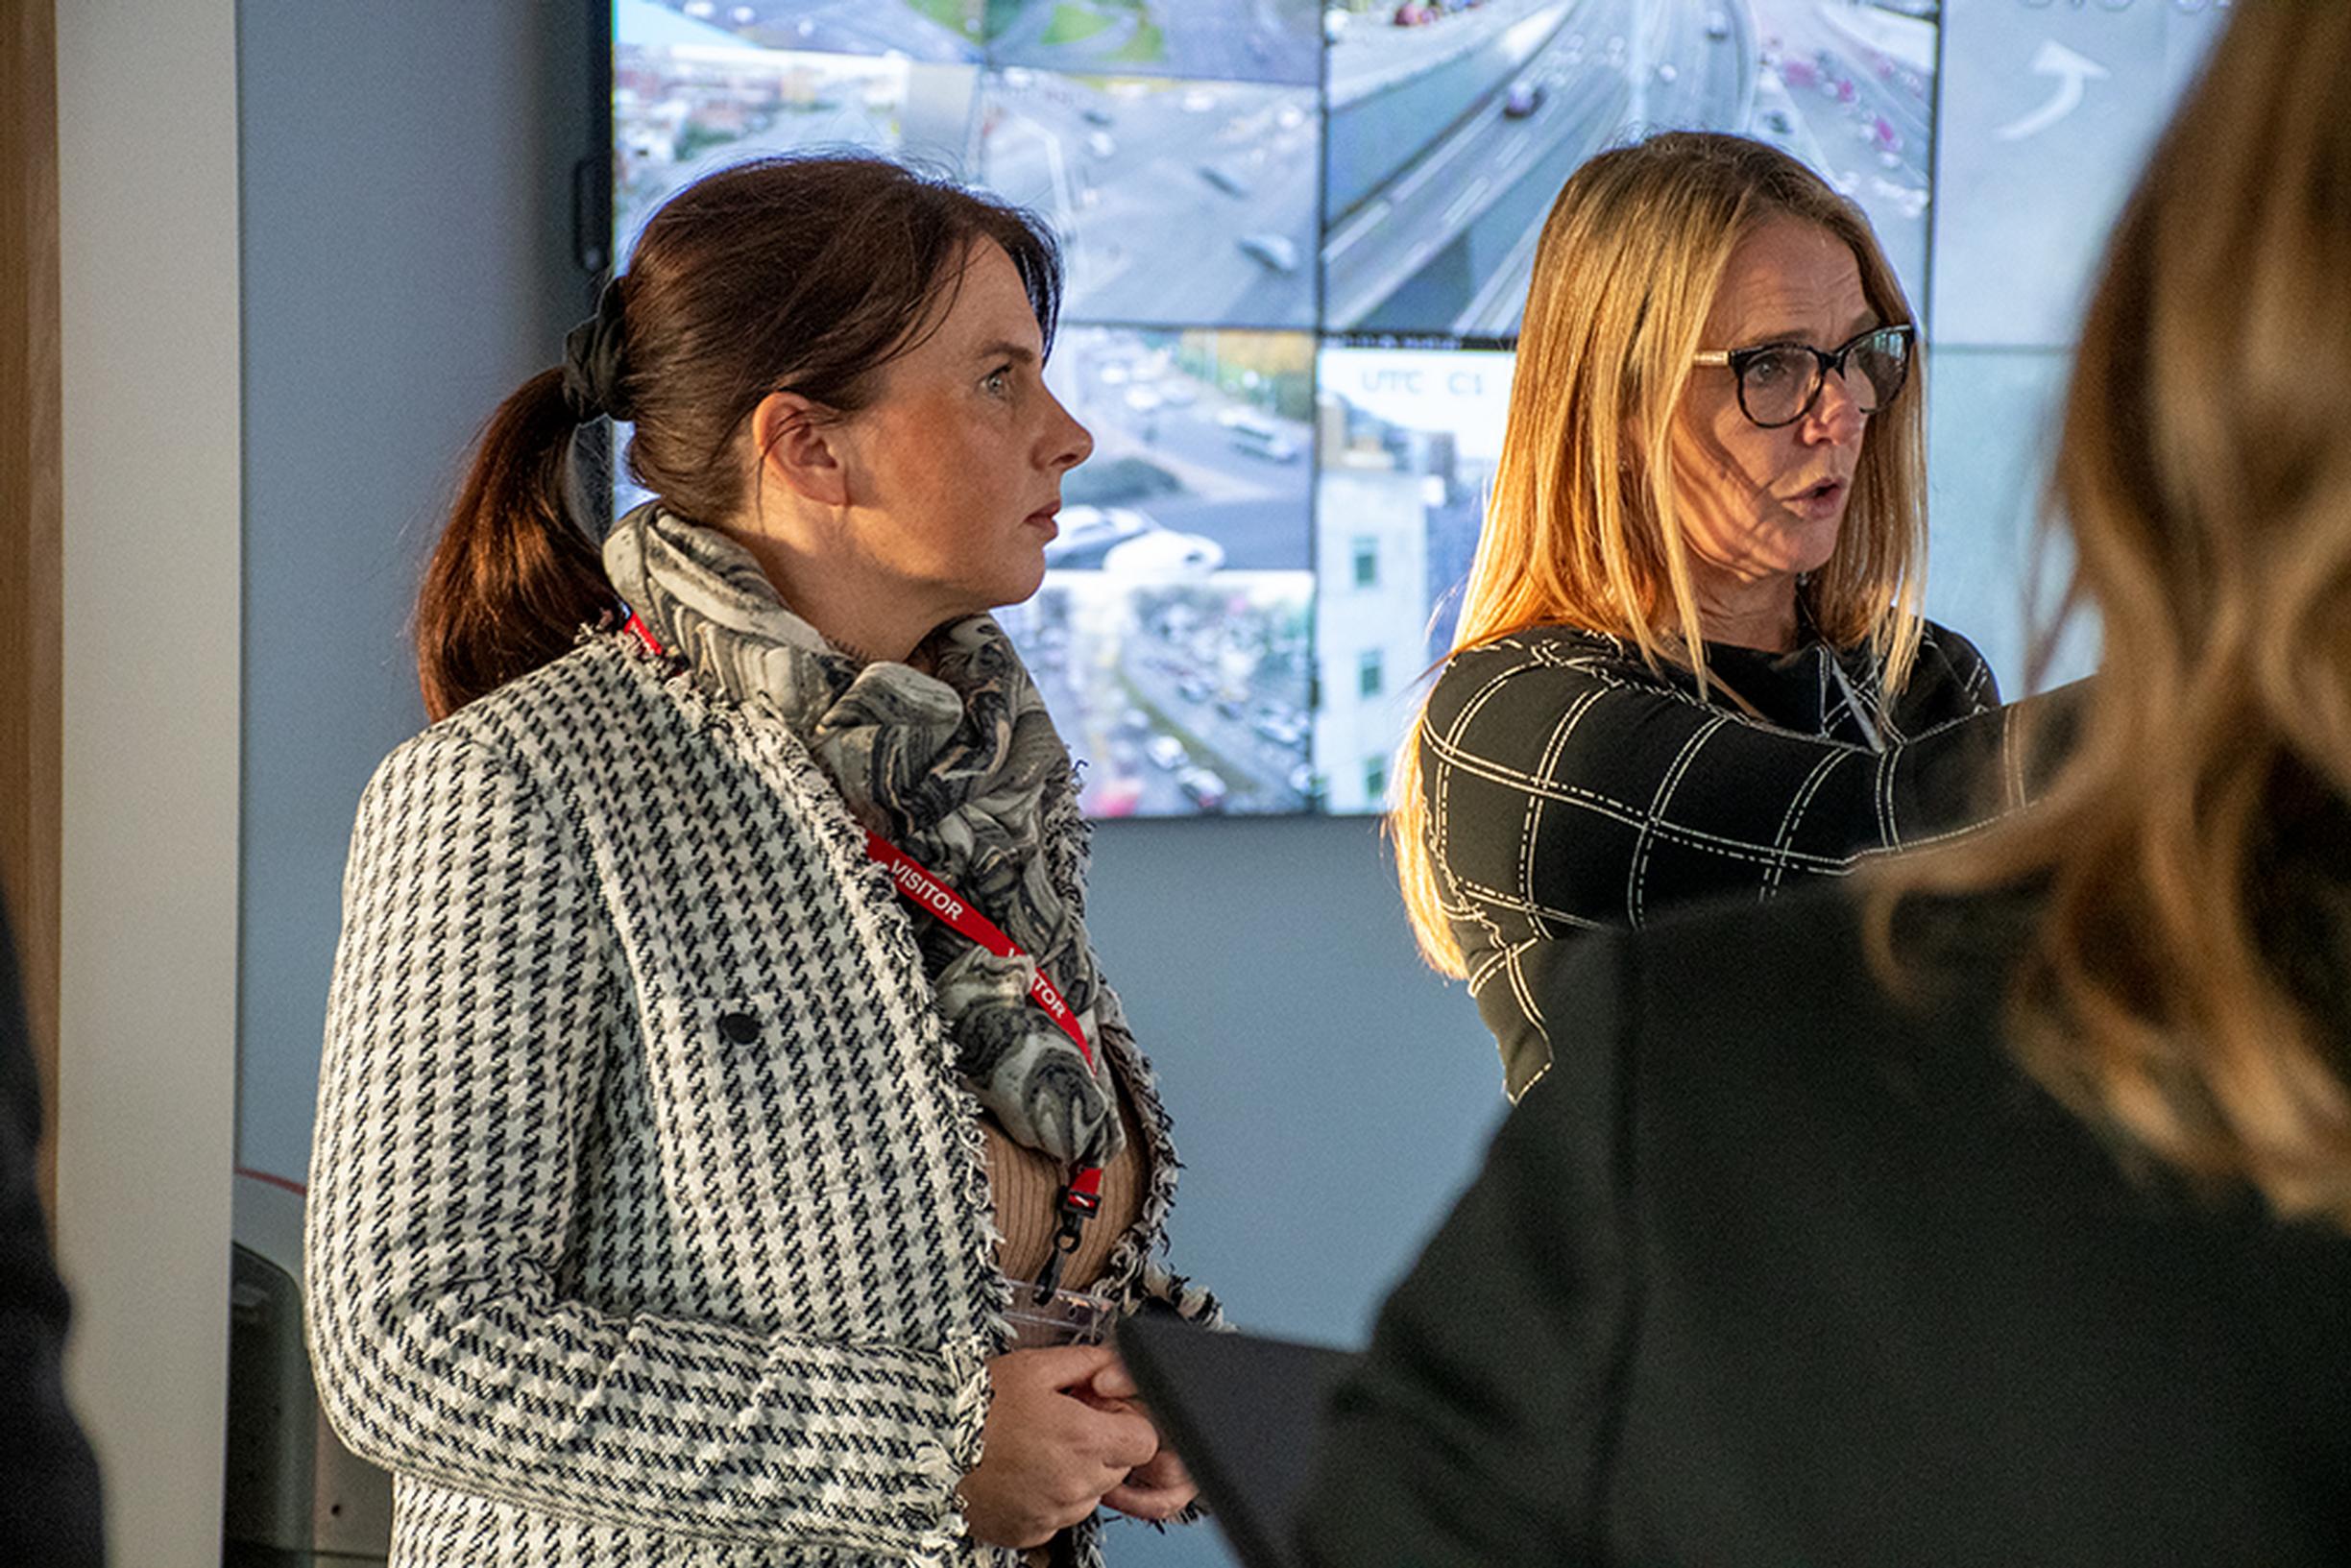 Transport minister Trudy Harrison visiting the Regional Transport Coordination Centre with TfWM interim managing director Anne Shaw